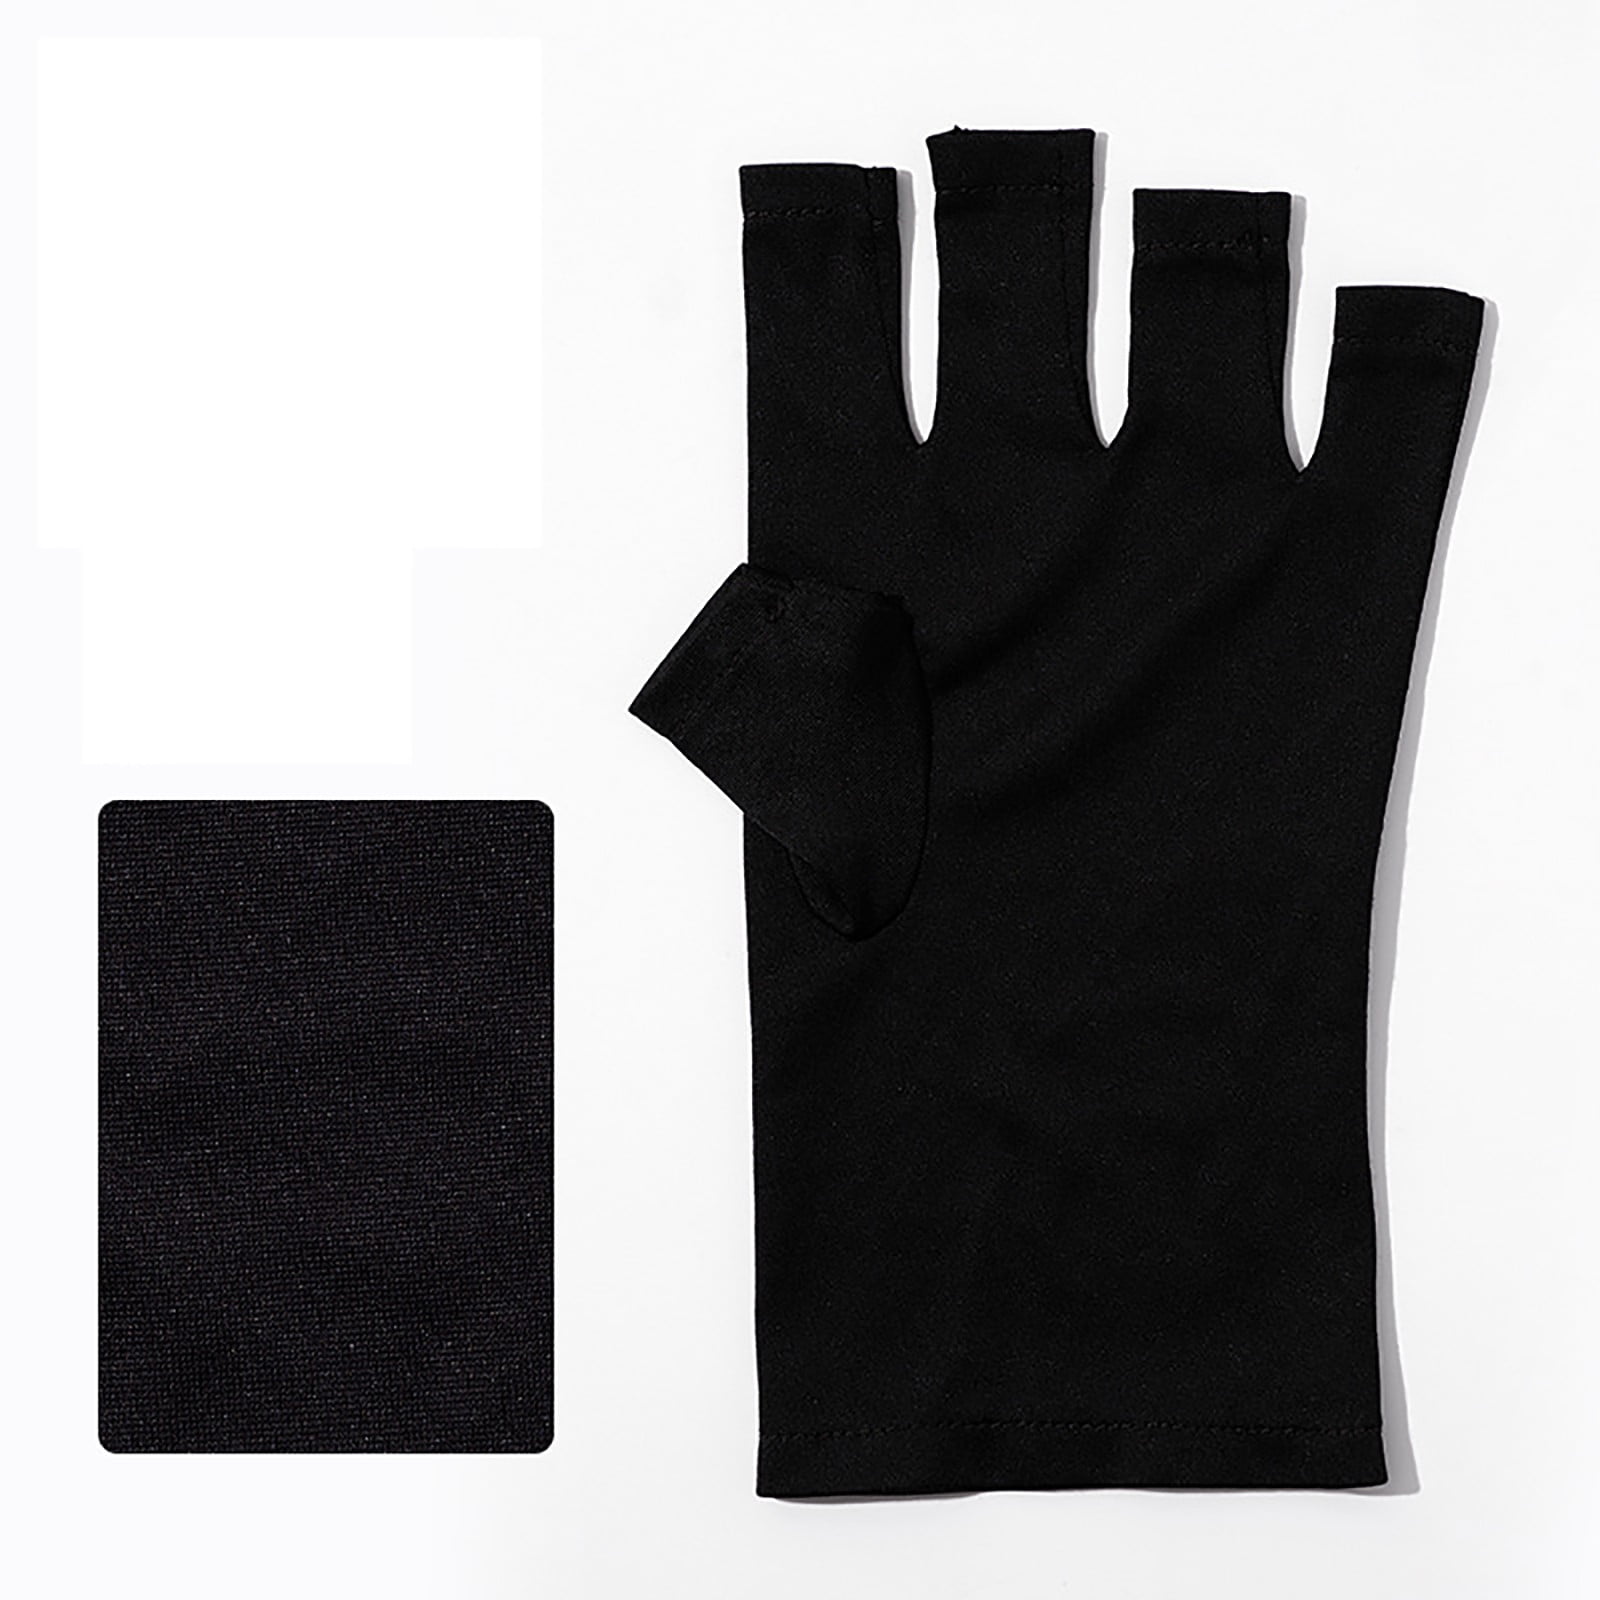 Vikakiooze Winter Gloves 1 Pair Silicone Oven Mitts Extra Long Flexible Oven  Gloves with Quilted Liner 